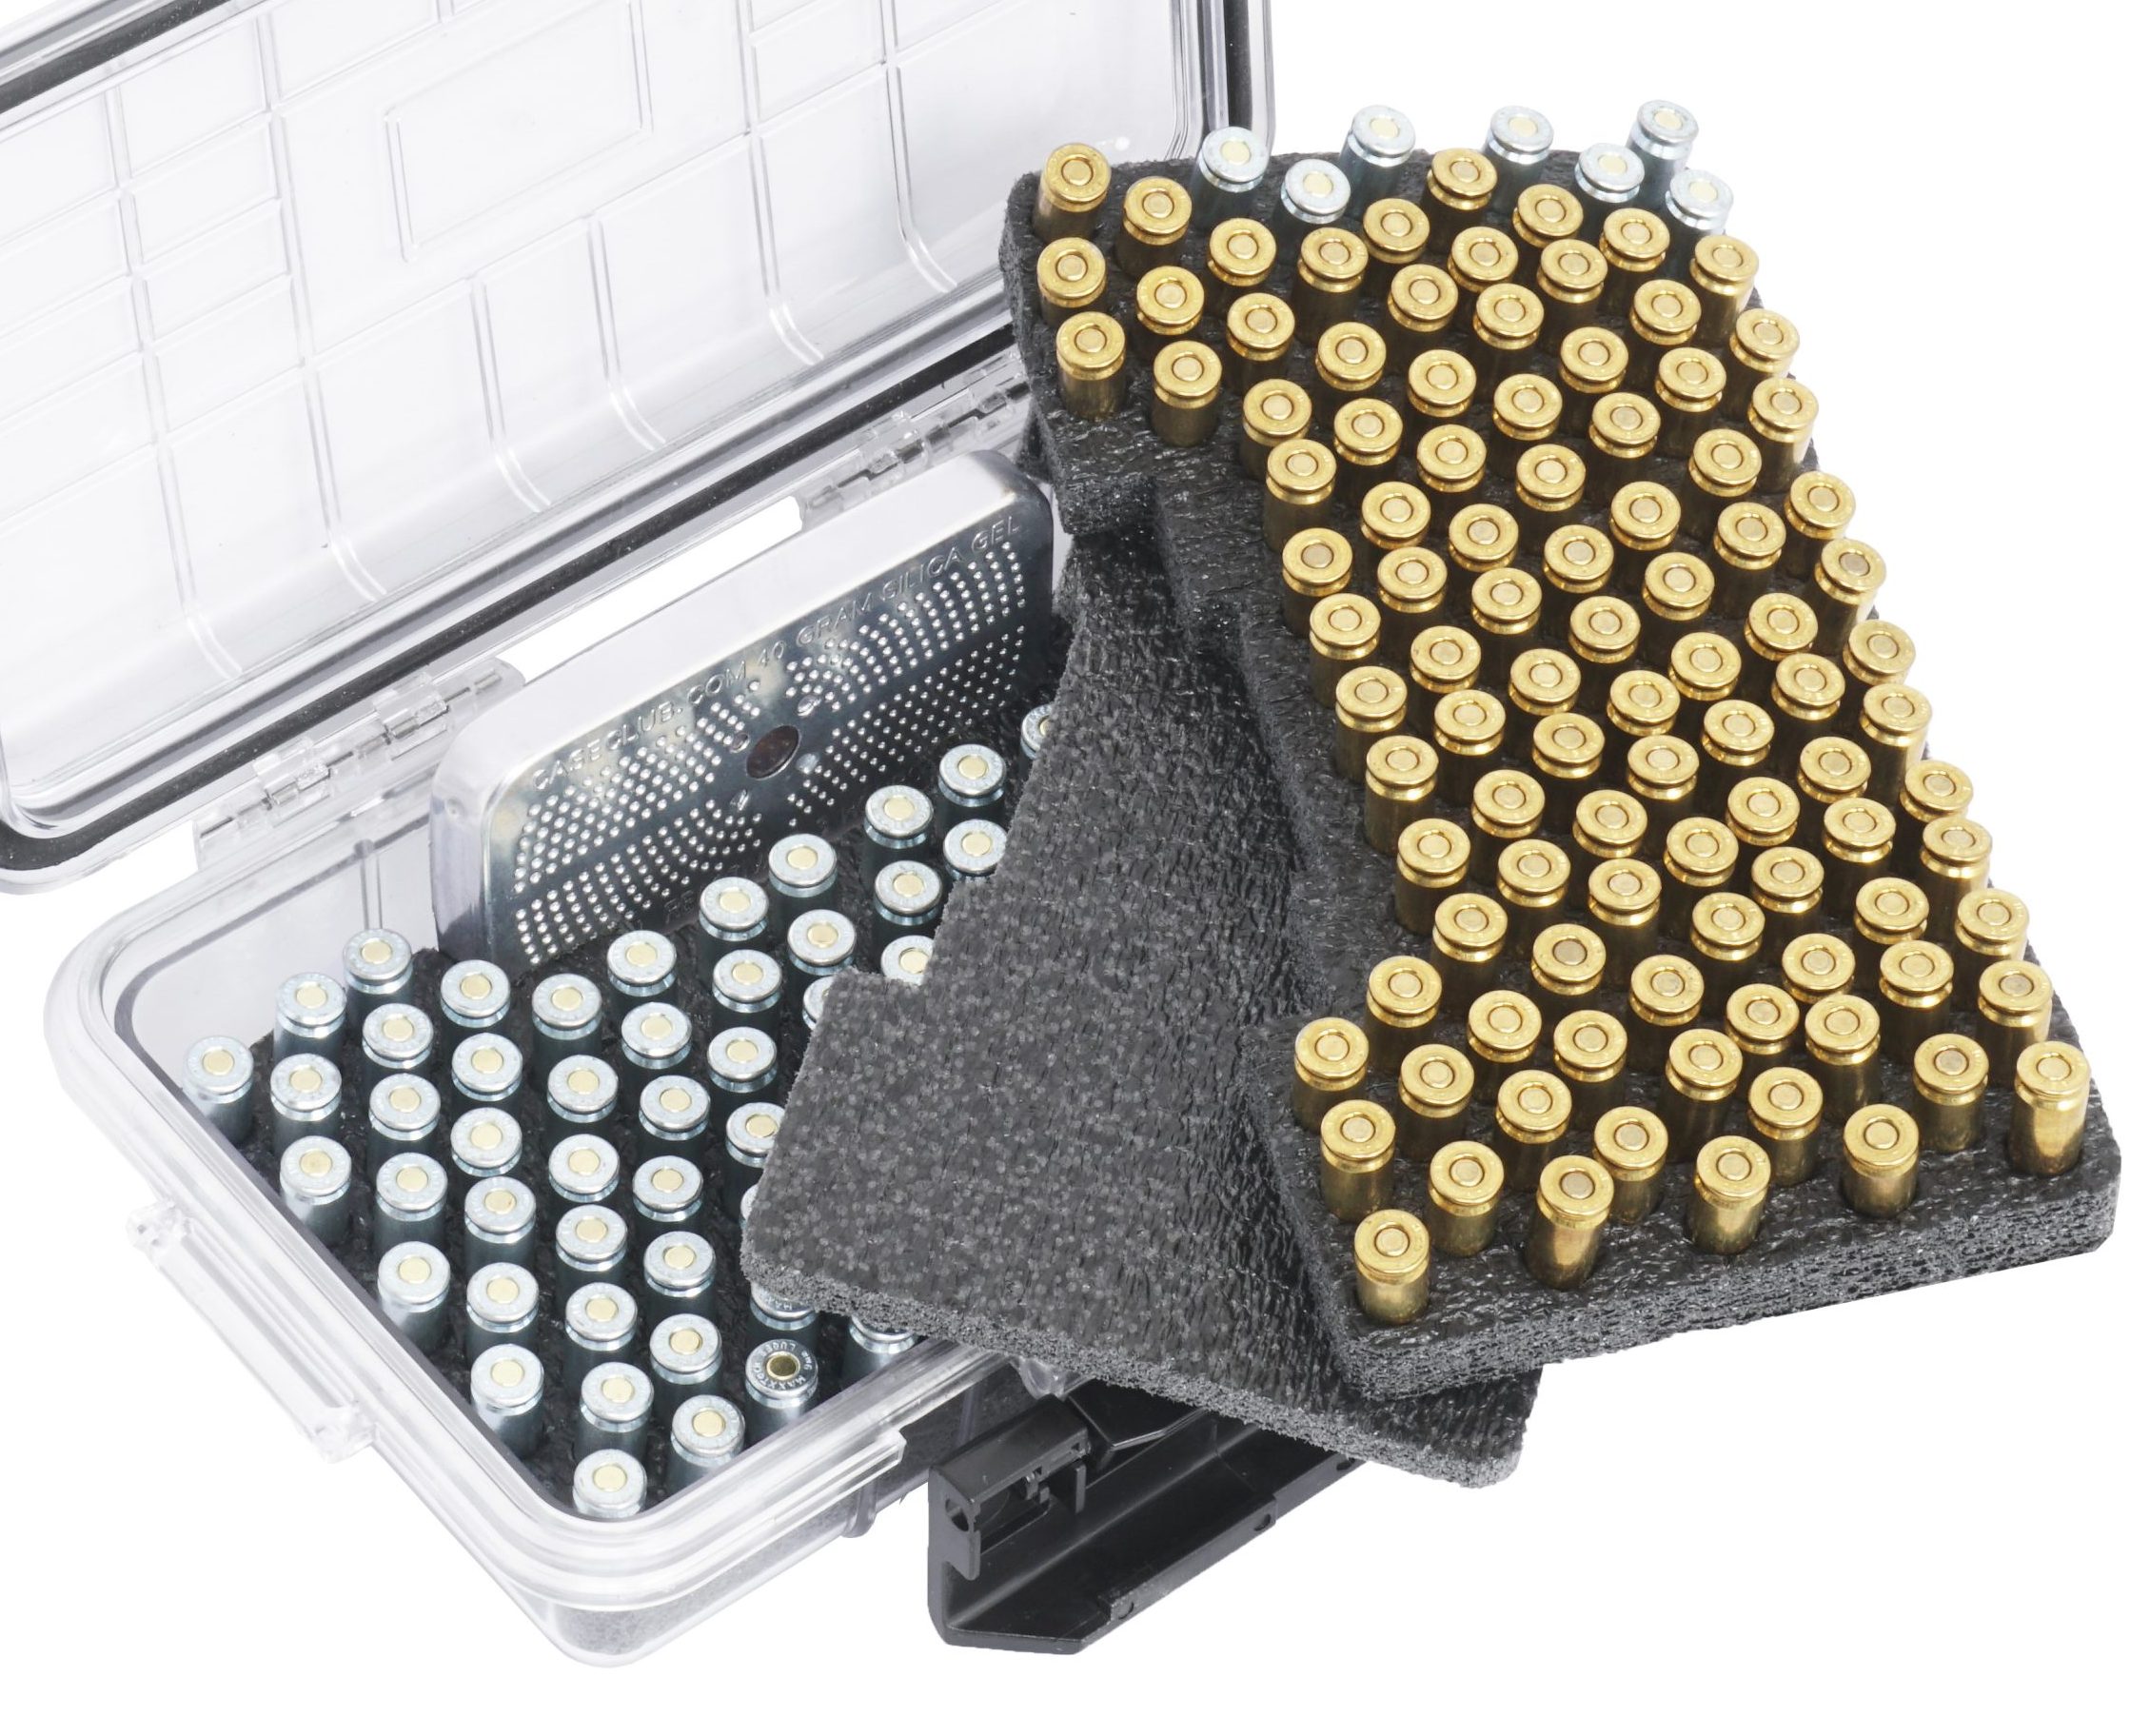 https://www.caseclub.com/wp-content/uploads/2014/09/214-9mm-Ammo-Case-Layered-Main-View-scaled-e1677708900860.jpg